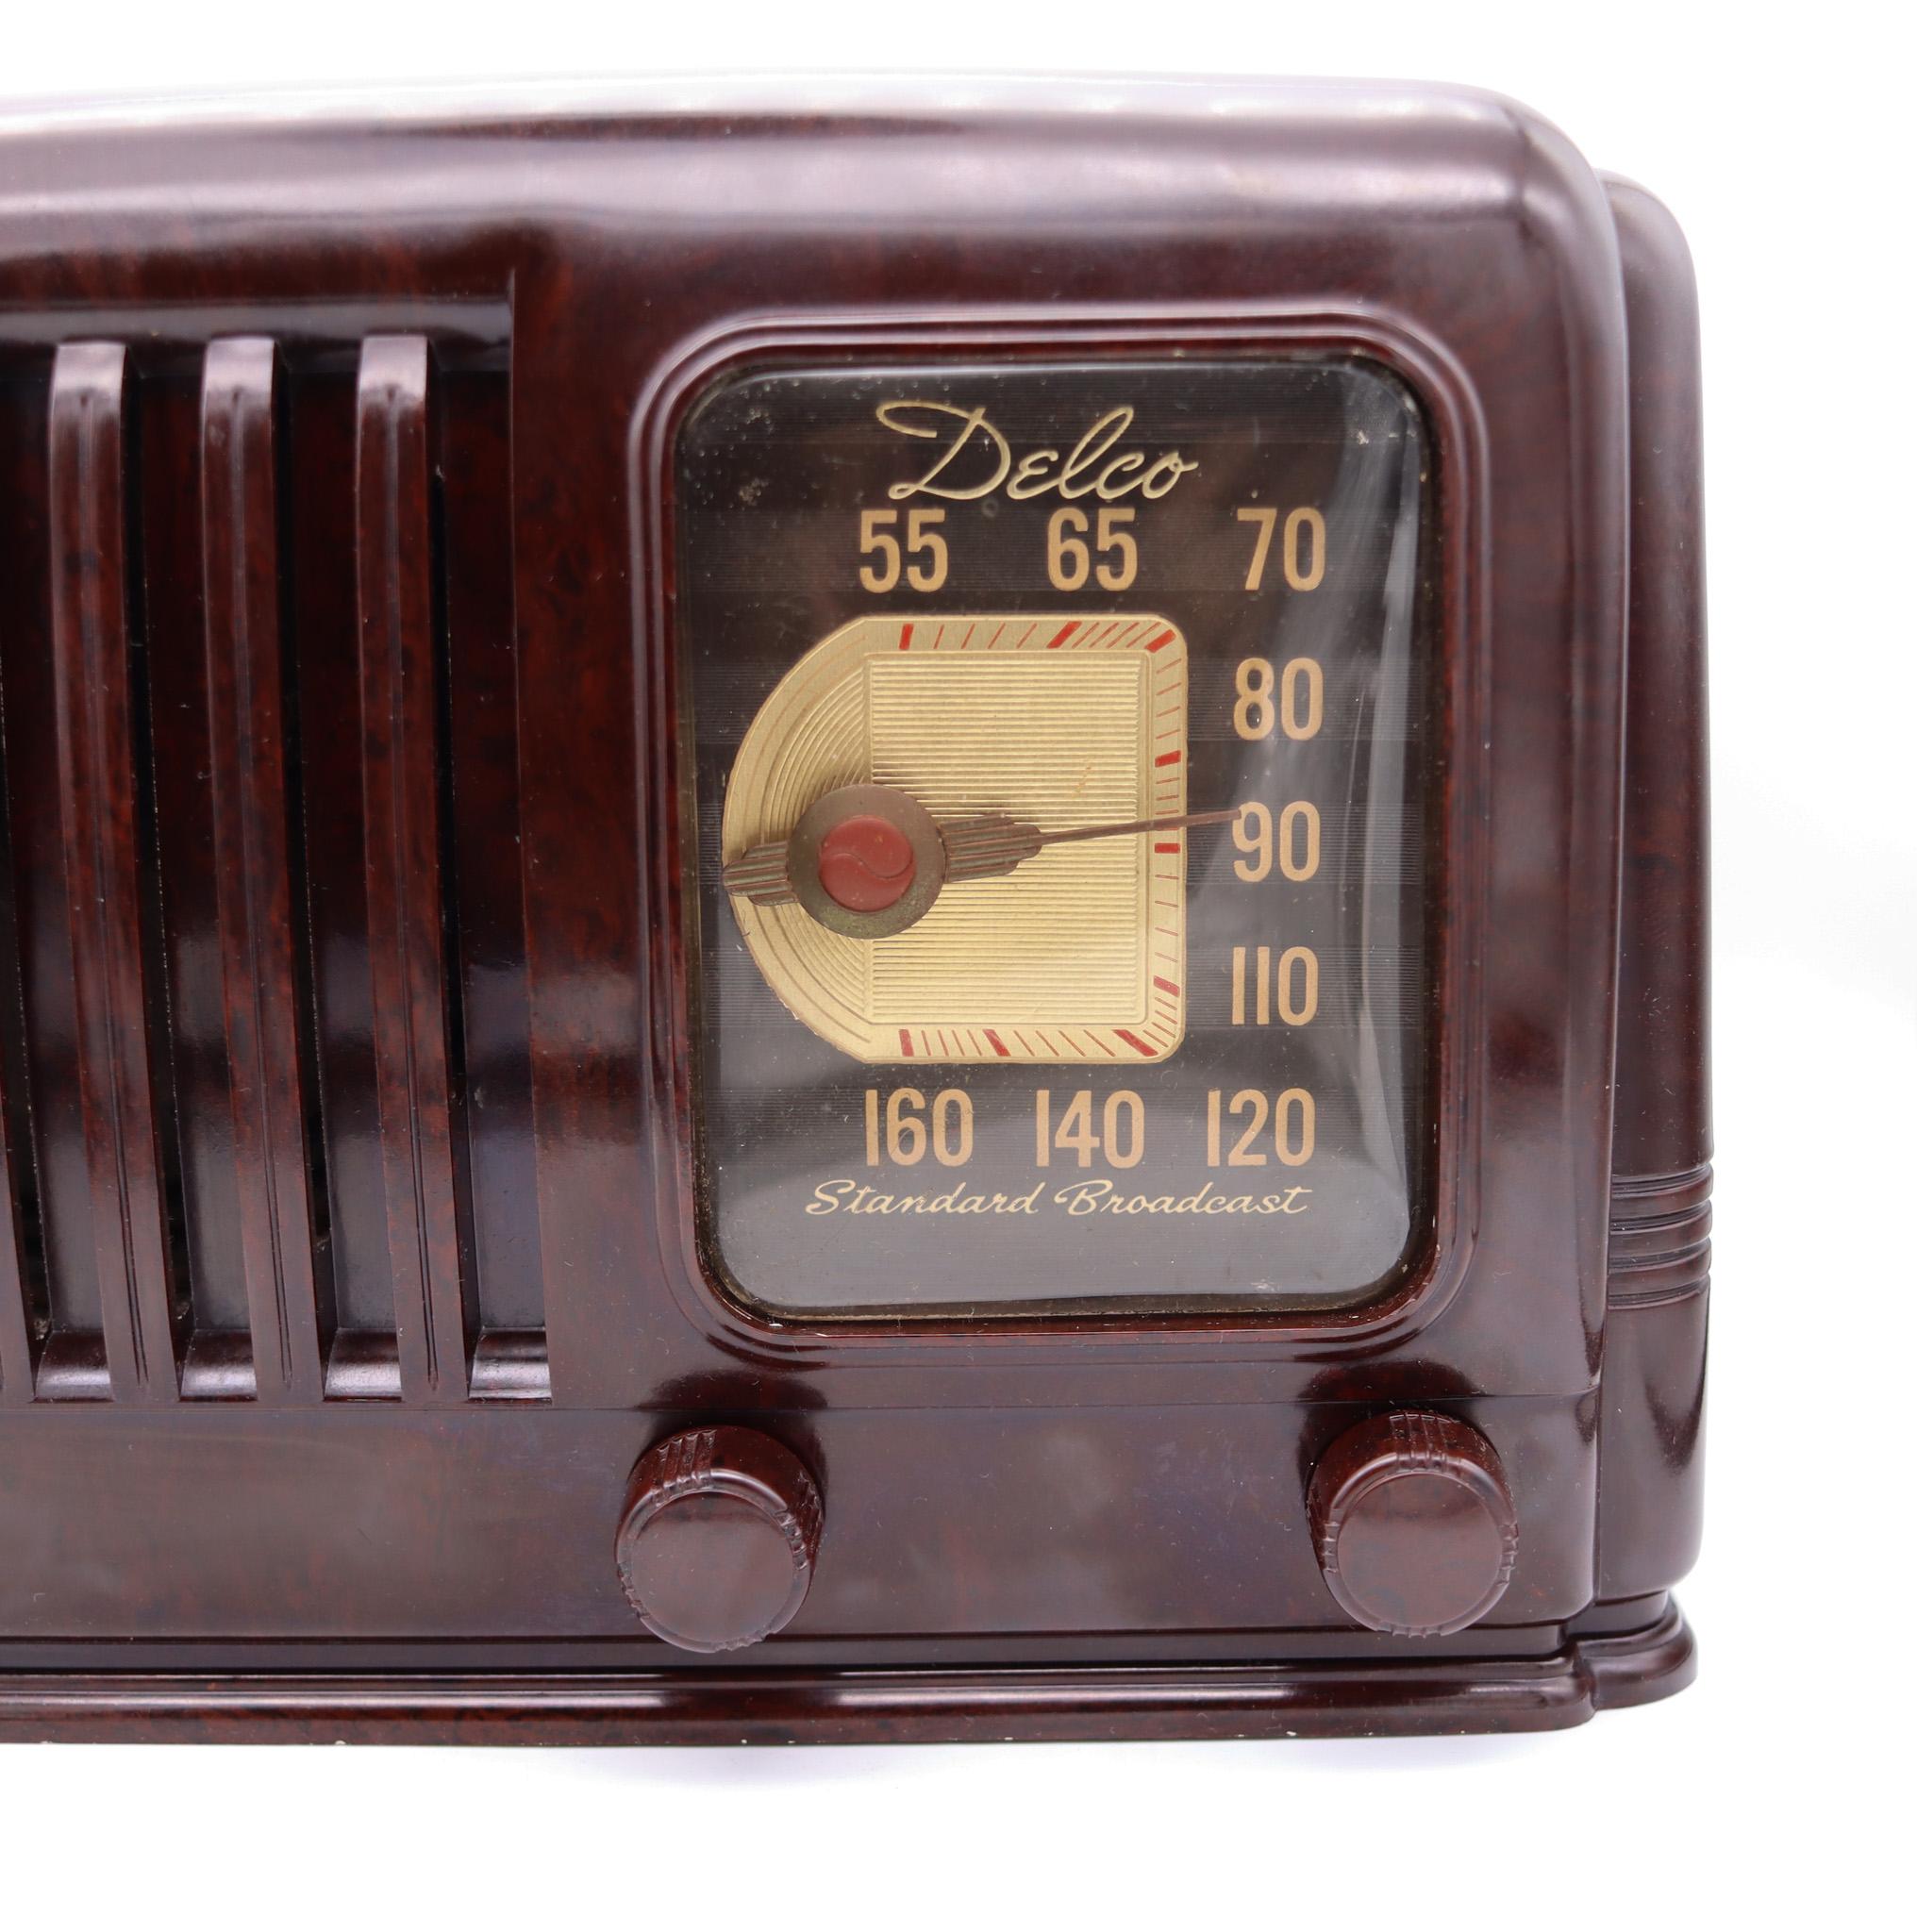 An Art Deco tube radio designed by Delco.

Here we are offering an absolutely stunning 1941 Delco model R-1171 tabletop tube radio. Featuring a gorgeous dark brown marbled Bakelite cabinet, attractive dial, louvered grill, built in loop antenna and